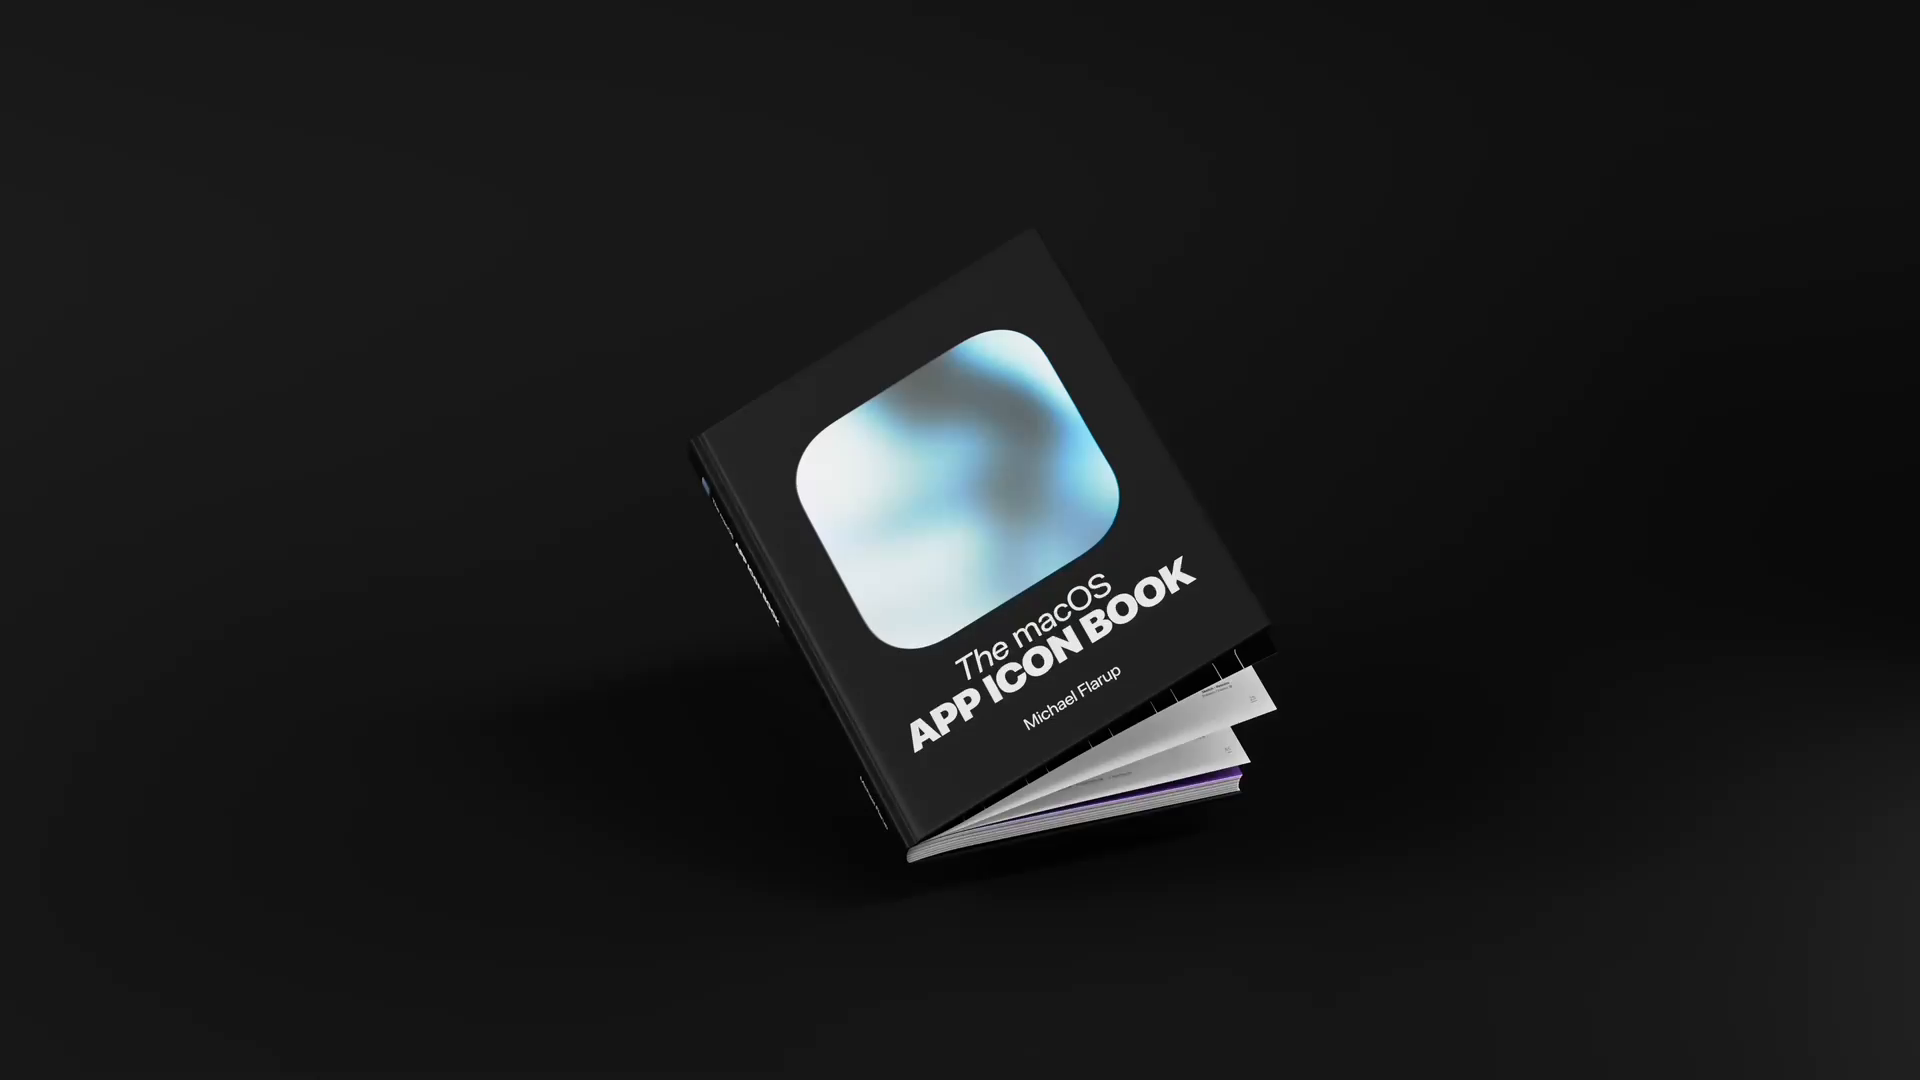 The macOS App Icon Book by Michael Flarup on Dribbble